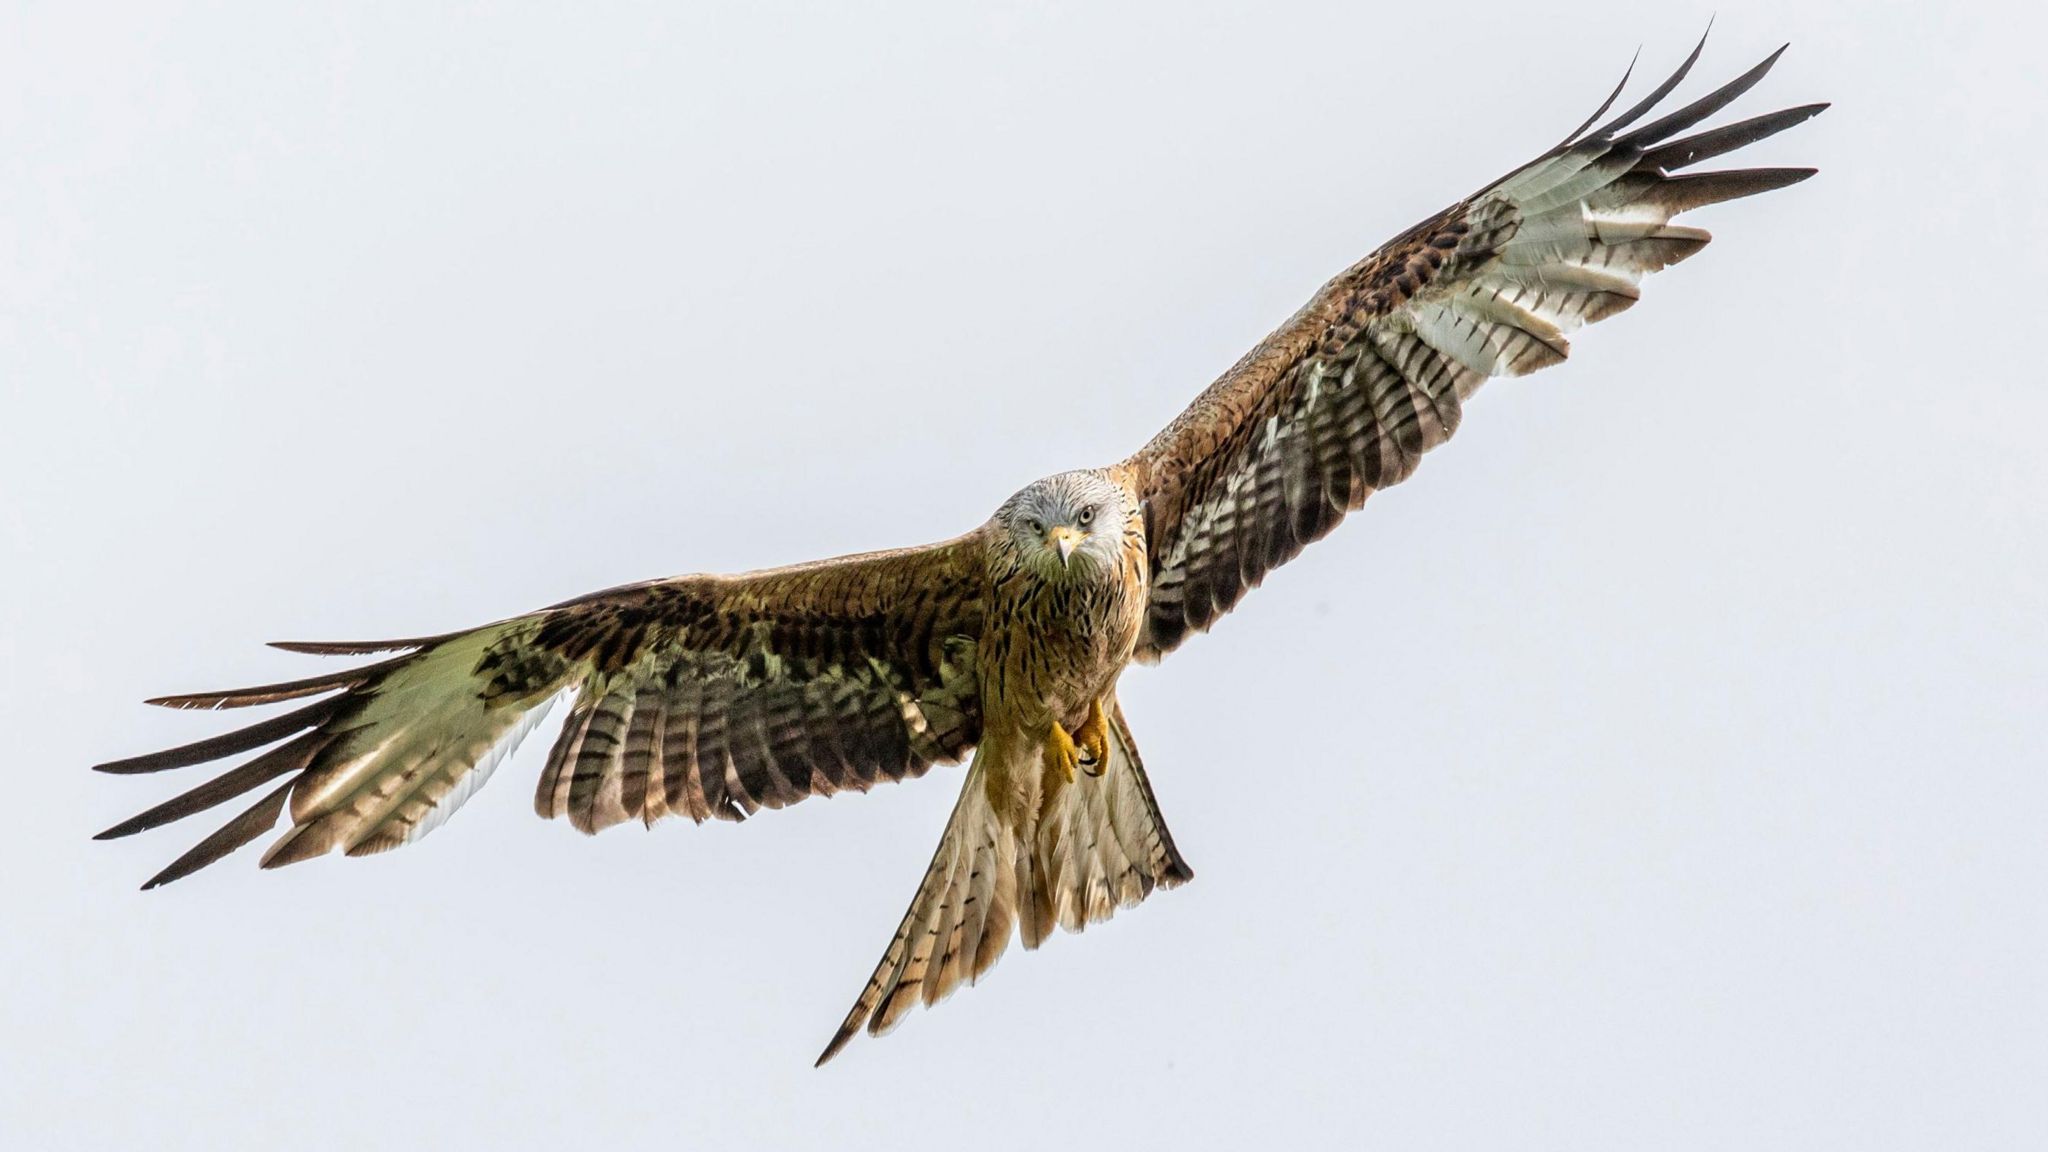 Undated handout photo issued by the RSPB of an adult red kite in flight in Wales.